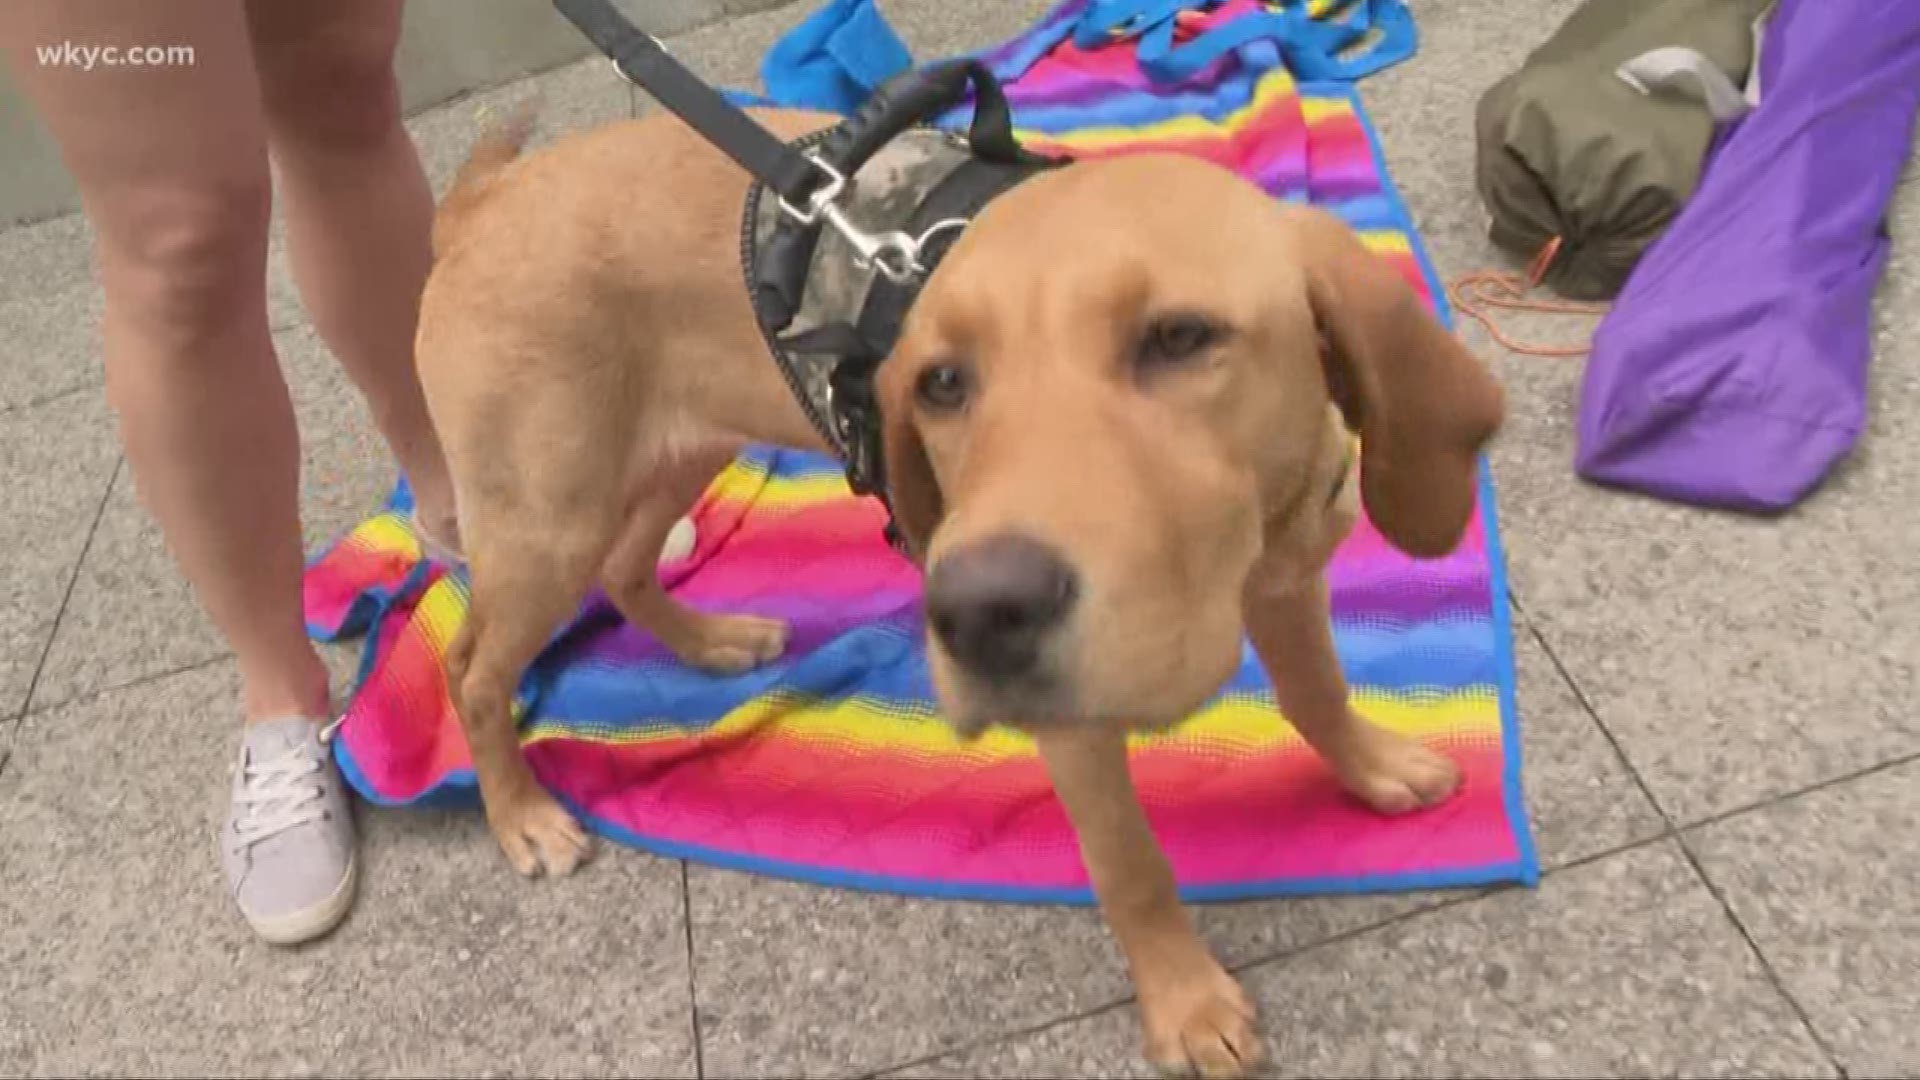 June 13, 2019: Over the weekend, Roxy and several other service dogs proudly represented Wags 4 Warriors at Tunnel 2 Towers climb, which took place at One Cleveland Center.  The event was started by the family of New York City firefighter Stephen Siller, who died on September 11, 2011. Siller, who was off-duty at the time the first plane crashed into the World Trade Center, raced from Brooklyn through Battery Tunnel to help rescue as many people as he could before he died in the collapse.